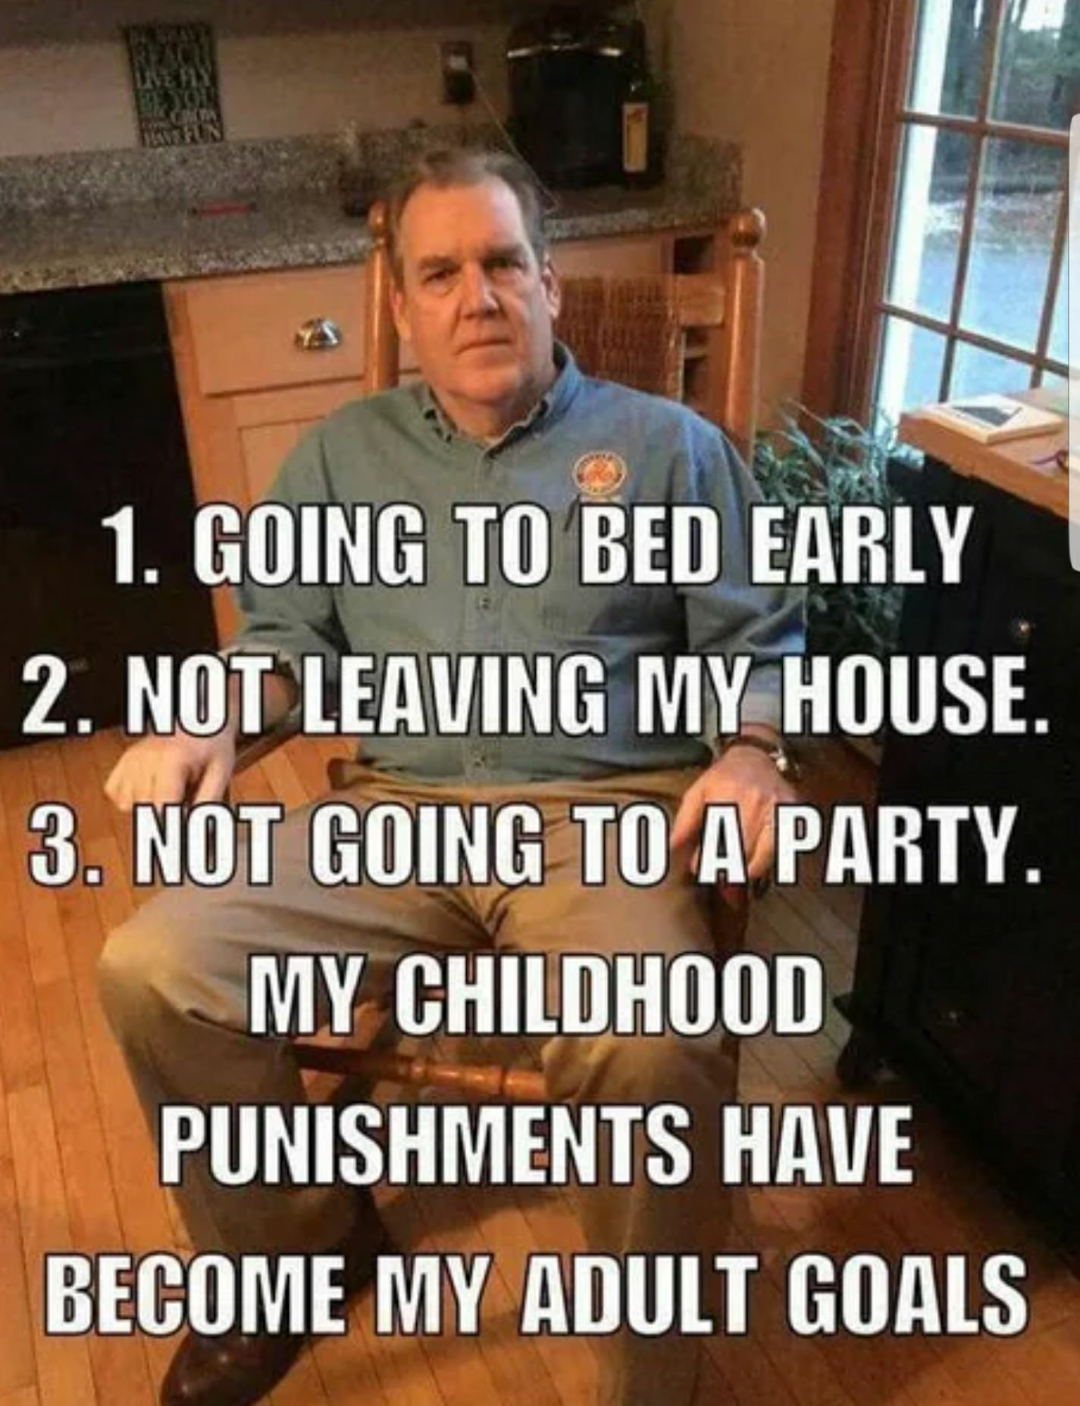 My childhood punishments have become my adult goals